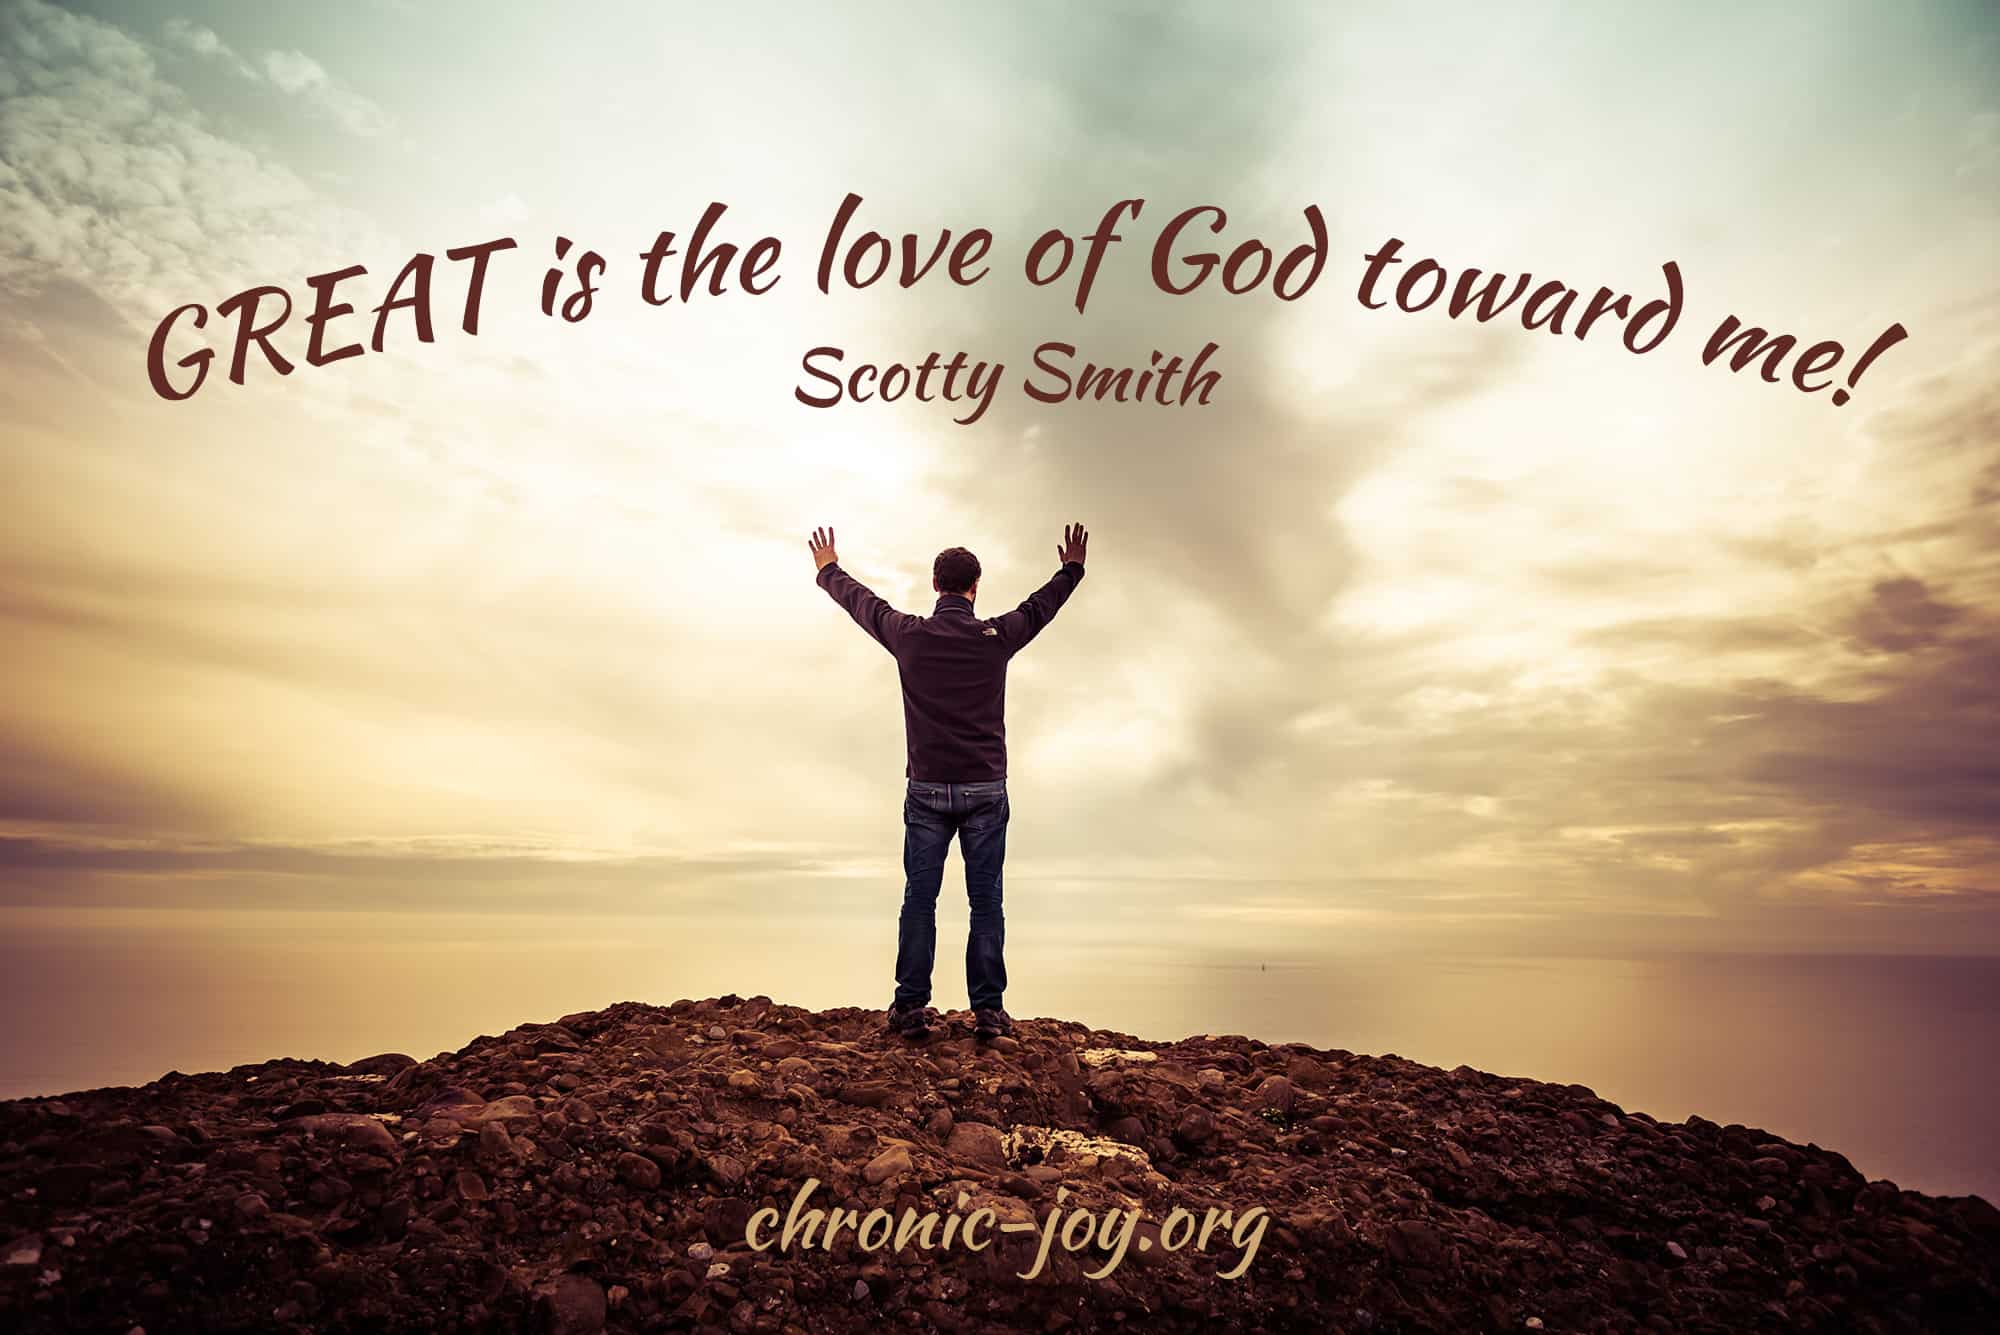 "Great is the love of God toward me!" Scotty Smith